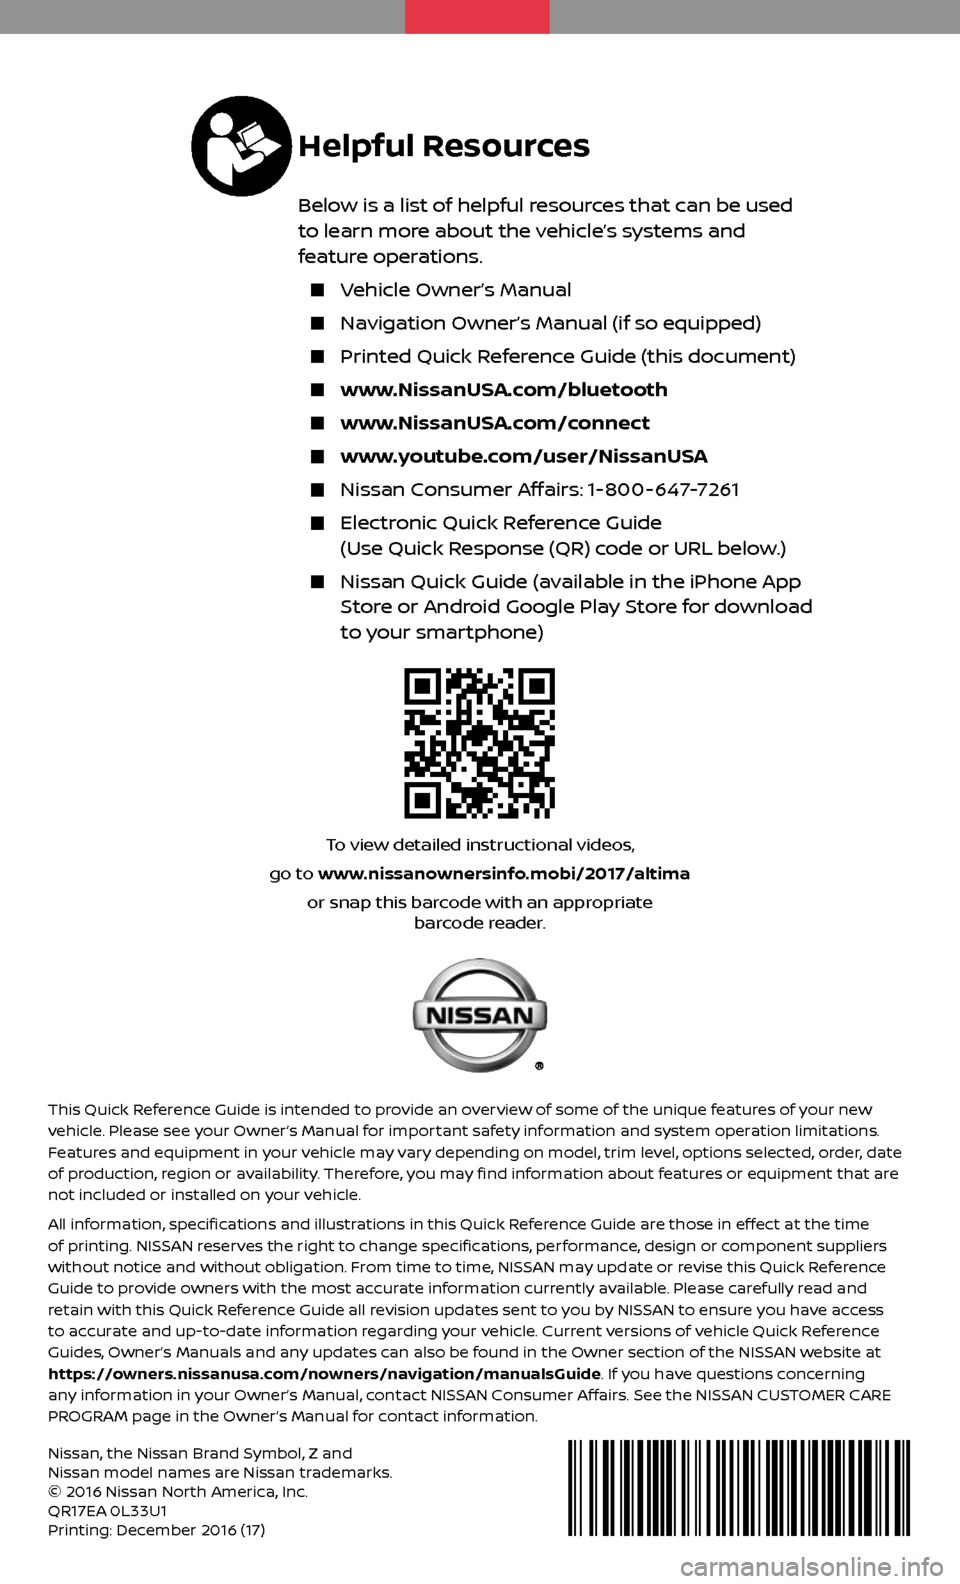 NISSAN ALTIMA 2017 L33 / 5.G Quick Reference Guide To view detailed instructional videos, 
go to www.nissanownersinfo.mobi/2017/altimaor snap this barcode with an appropriate   barcode reader.
 
Helpful Resources
Below is a list of helpful resources t